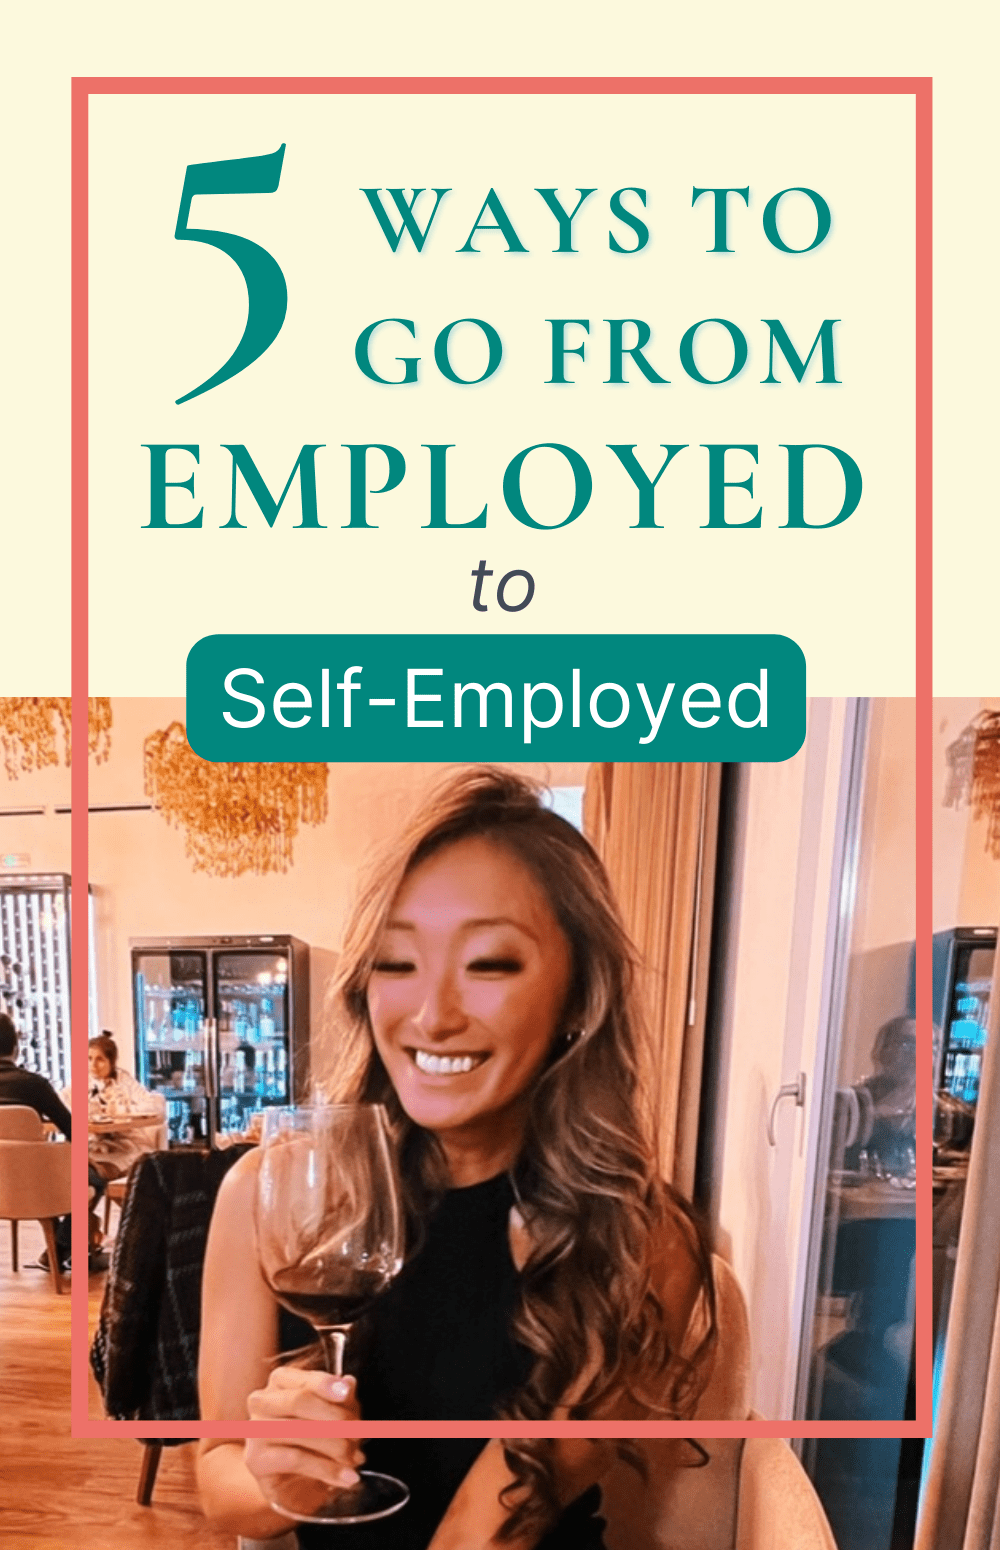 5 Ways To Go From Employed To Self-Employed